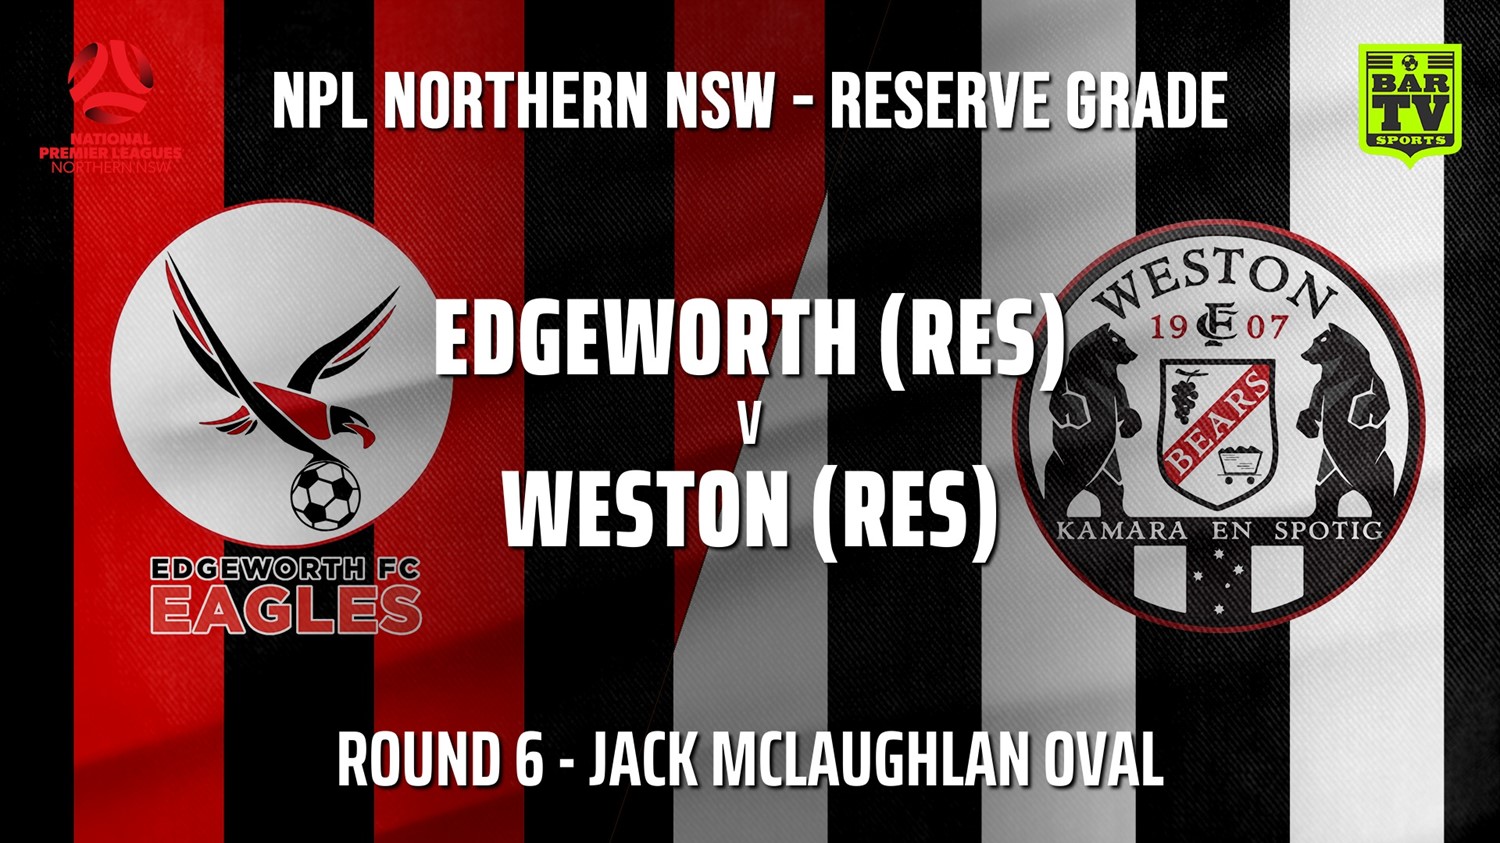 210509-NPL NNSW RES Round 6 - Edgeworth Eagles v Weston Workers FC Minigame Slate Image